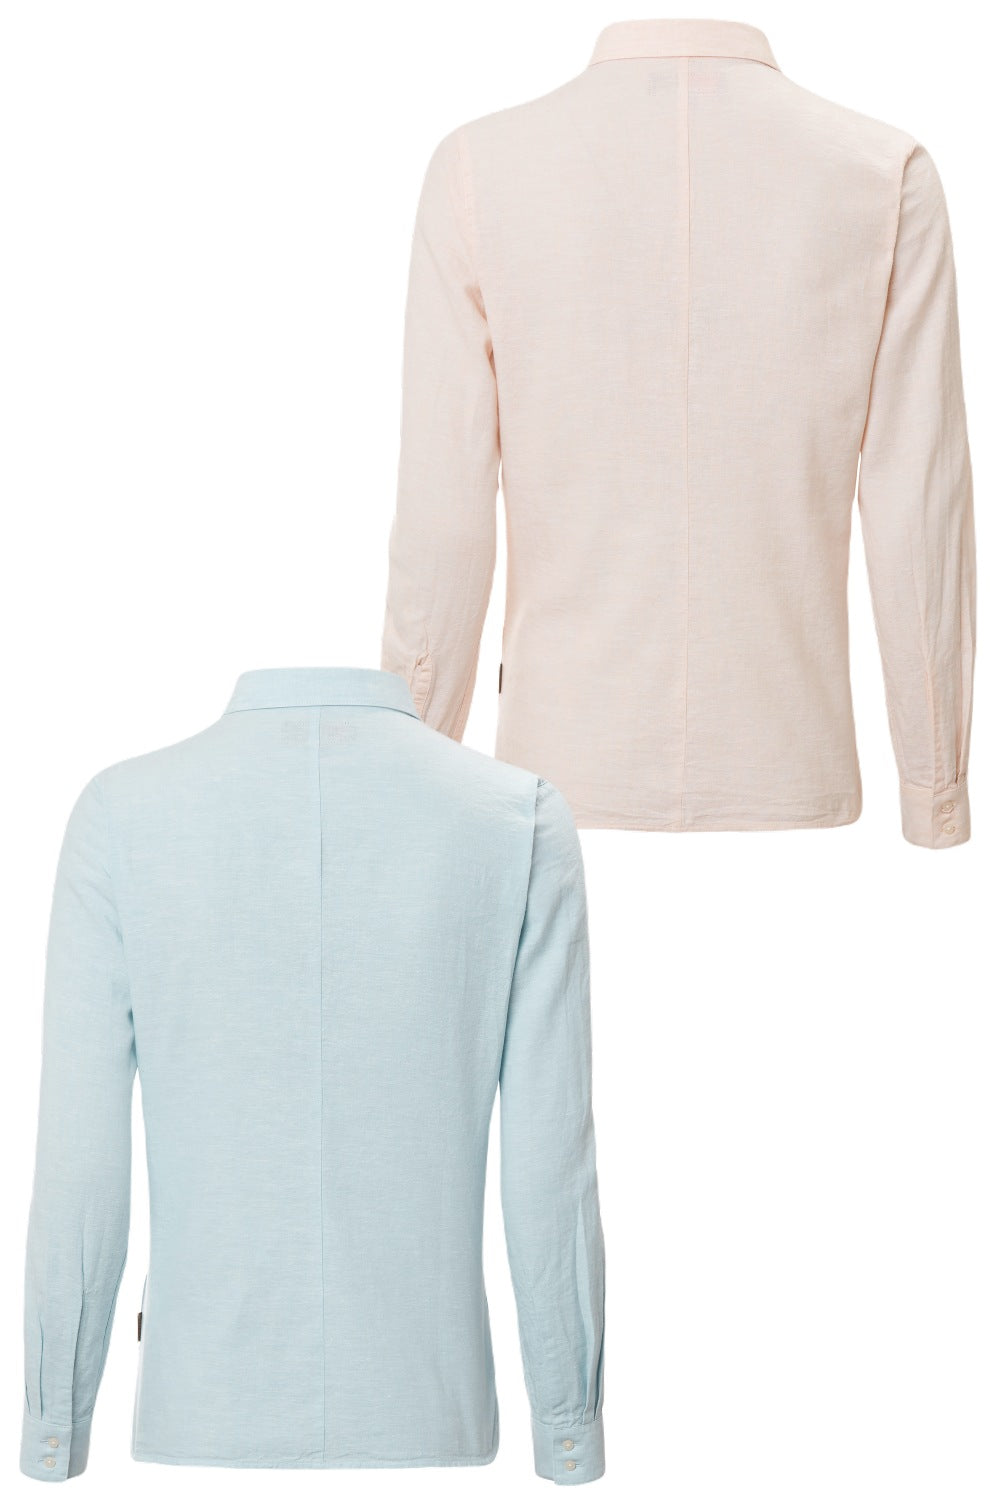 Musto Ladies Country Linen Shirt in Pale Blue and Hush